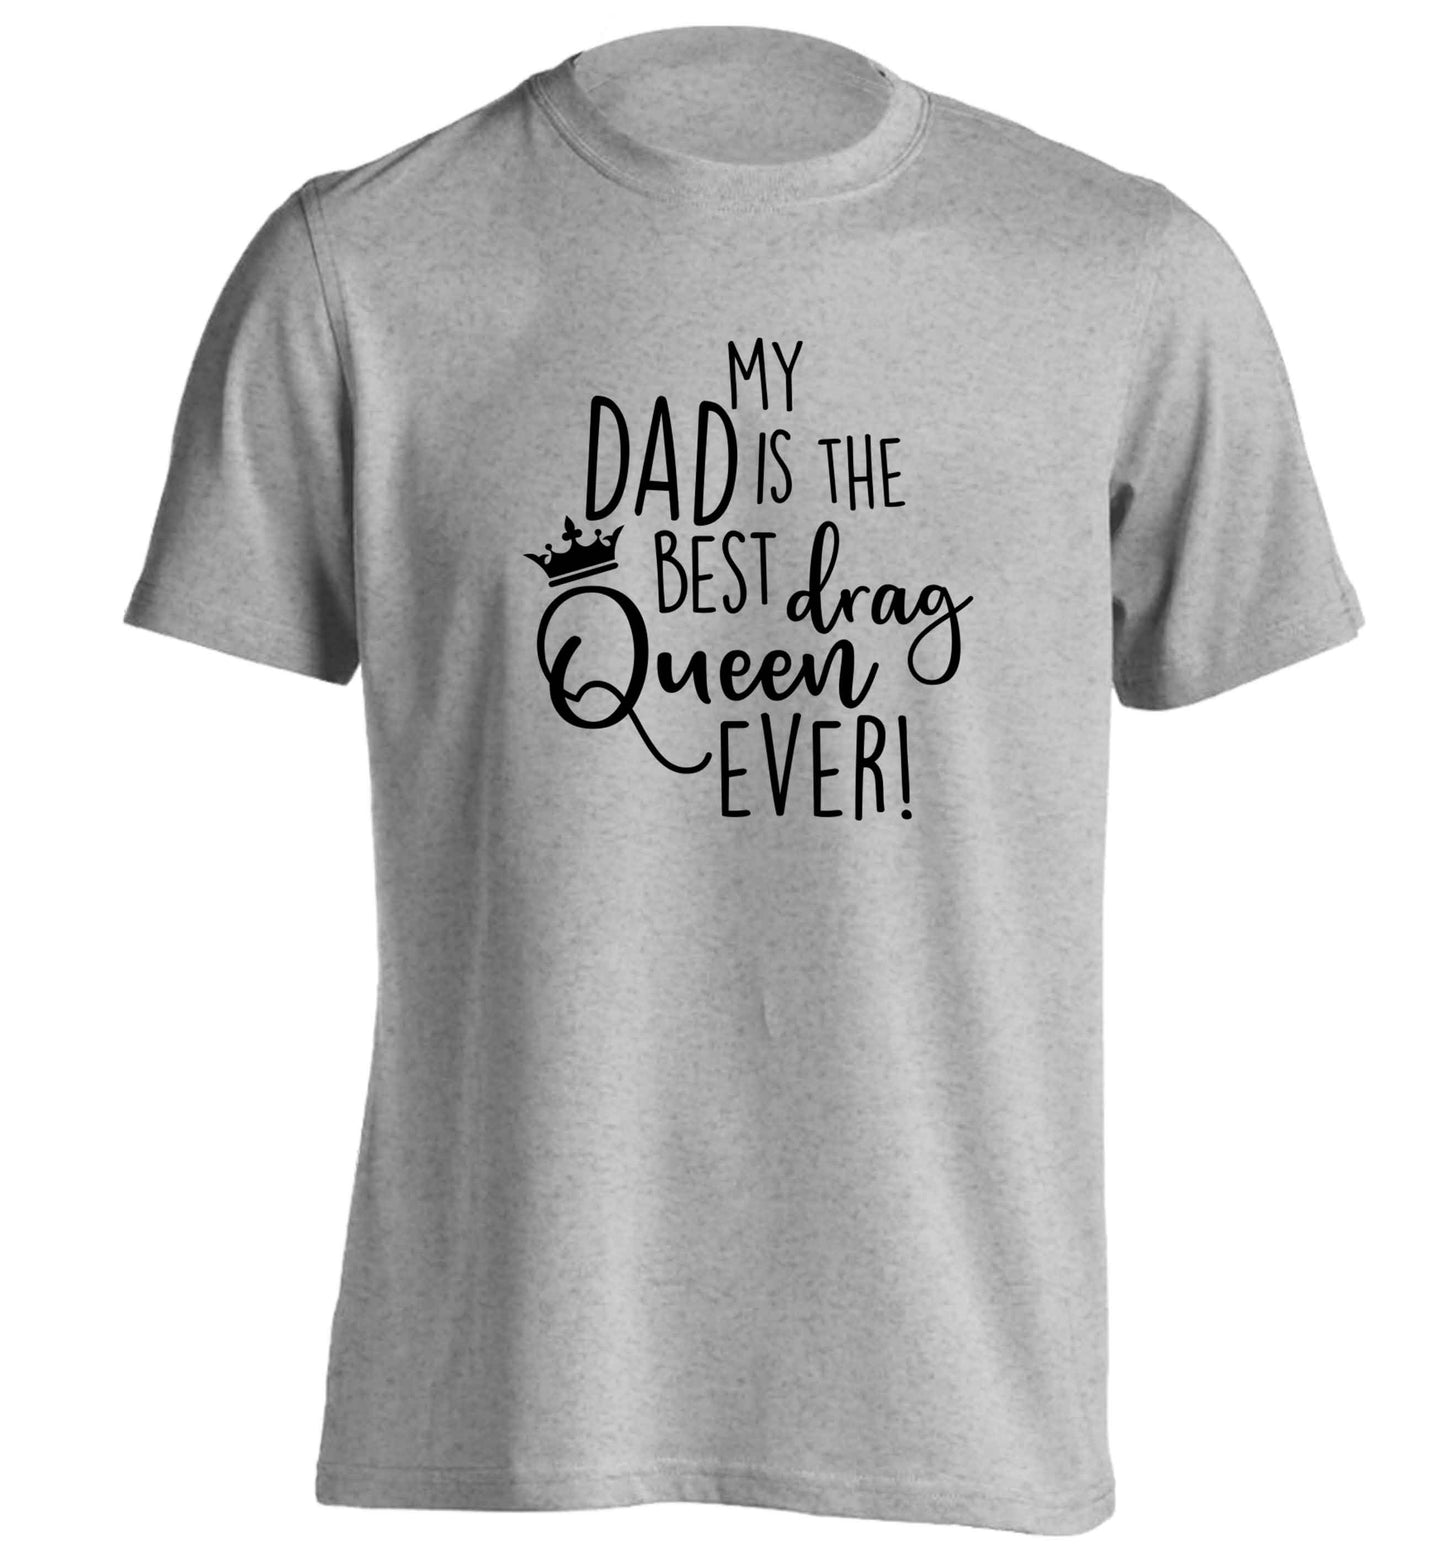 My dad is the best drag Queen ever adults unisex grey Tshirt 2XL